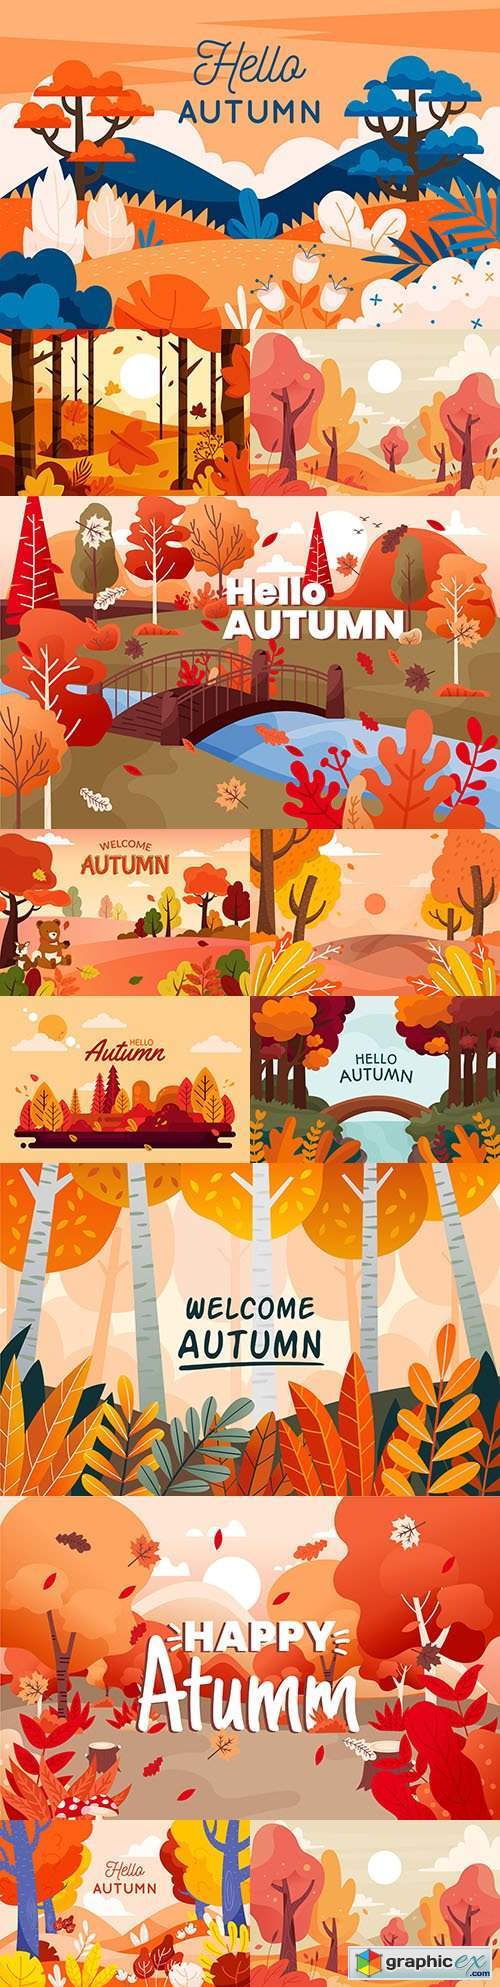 Autumn background with colorful view flat design illustration